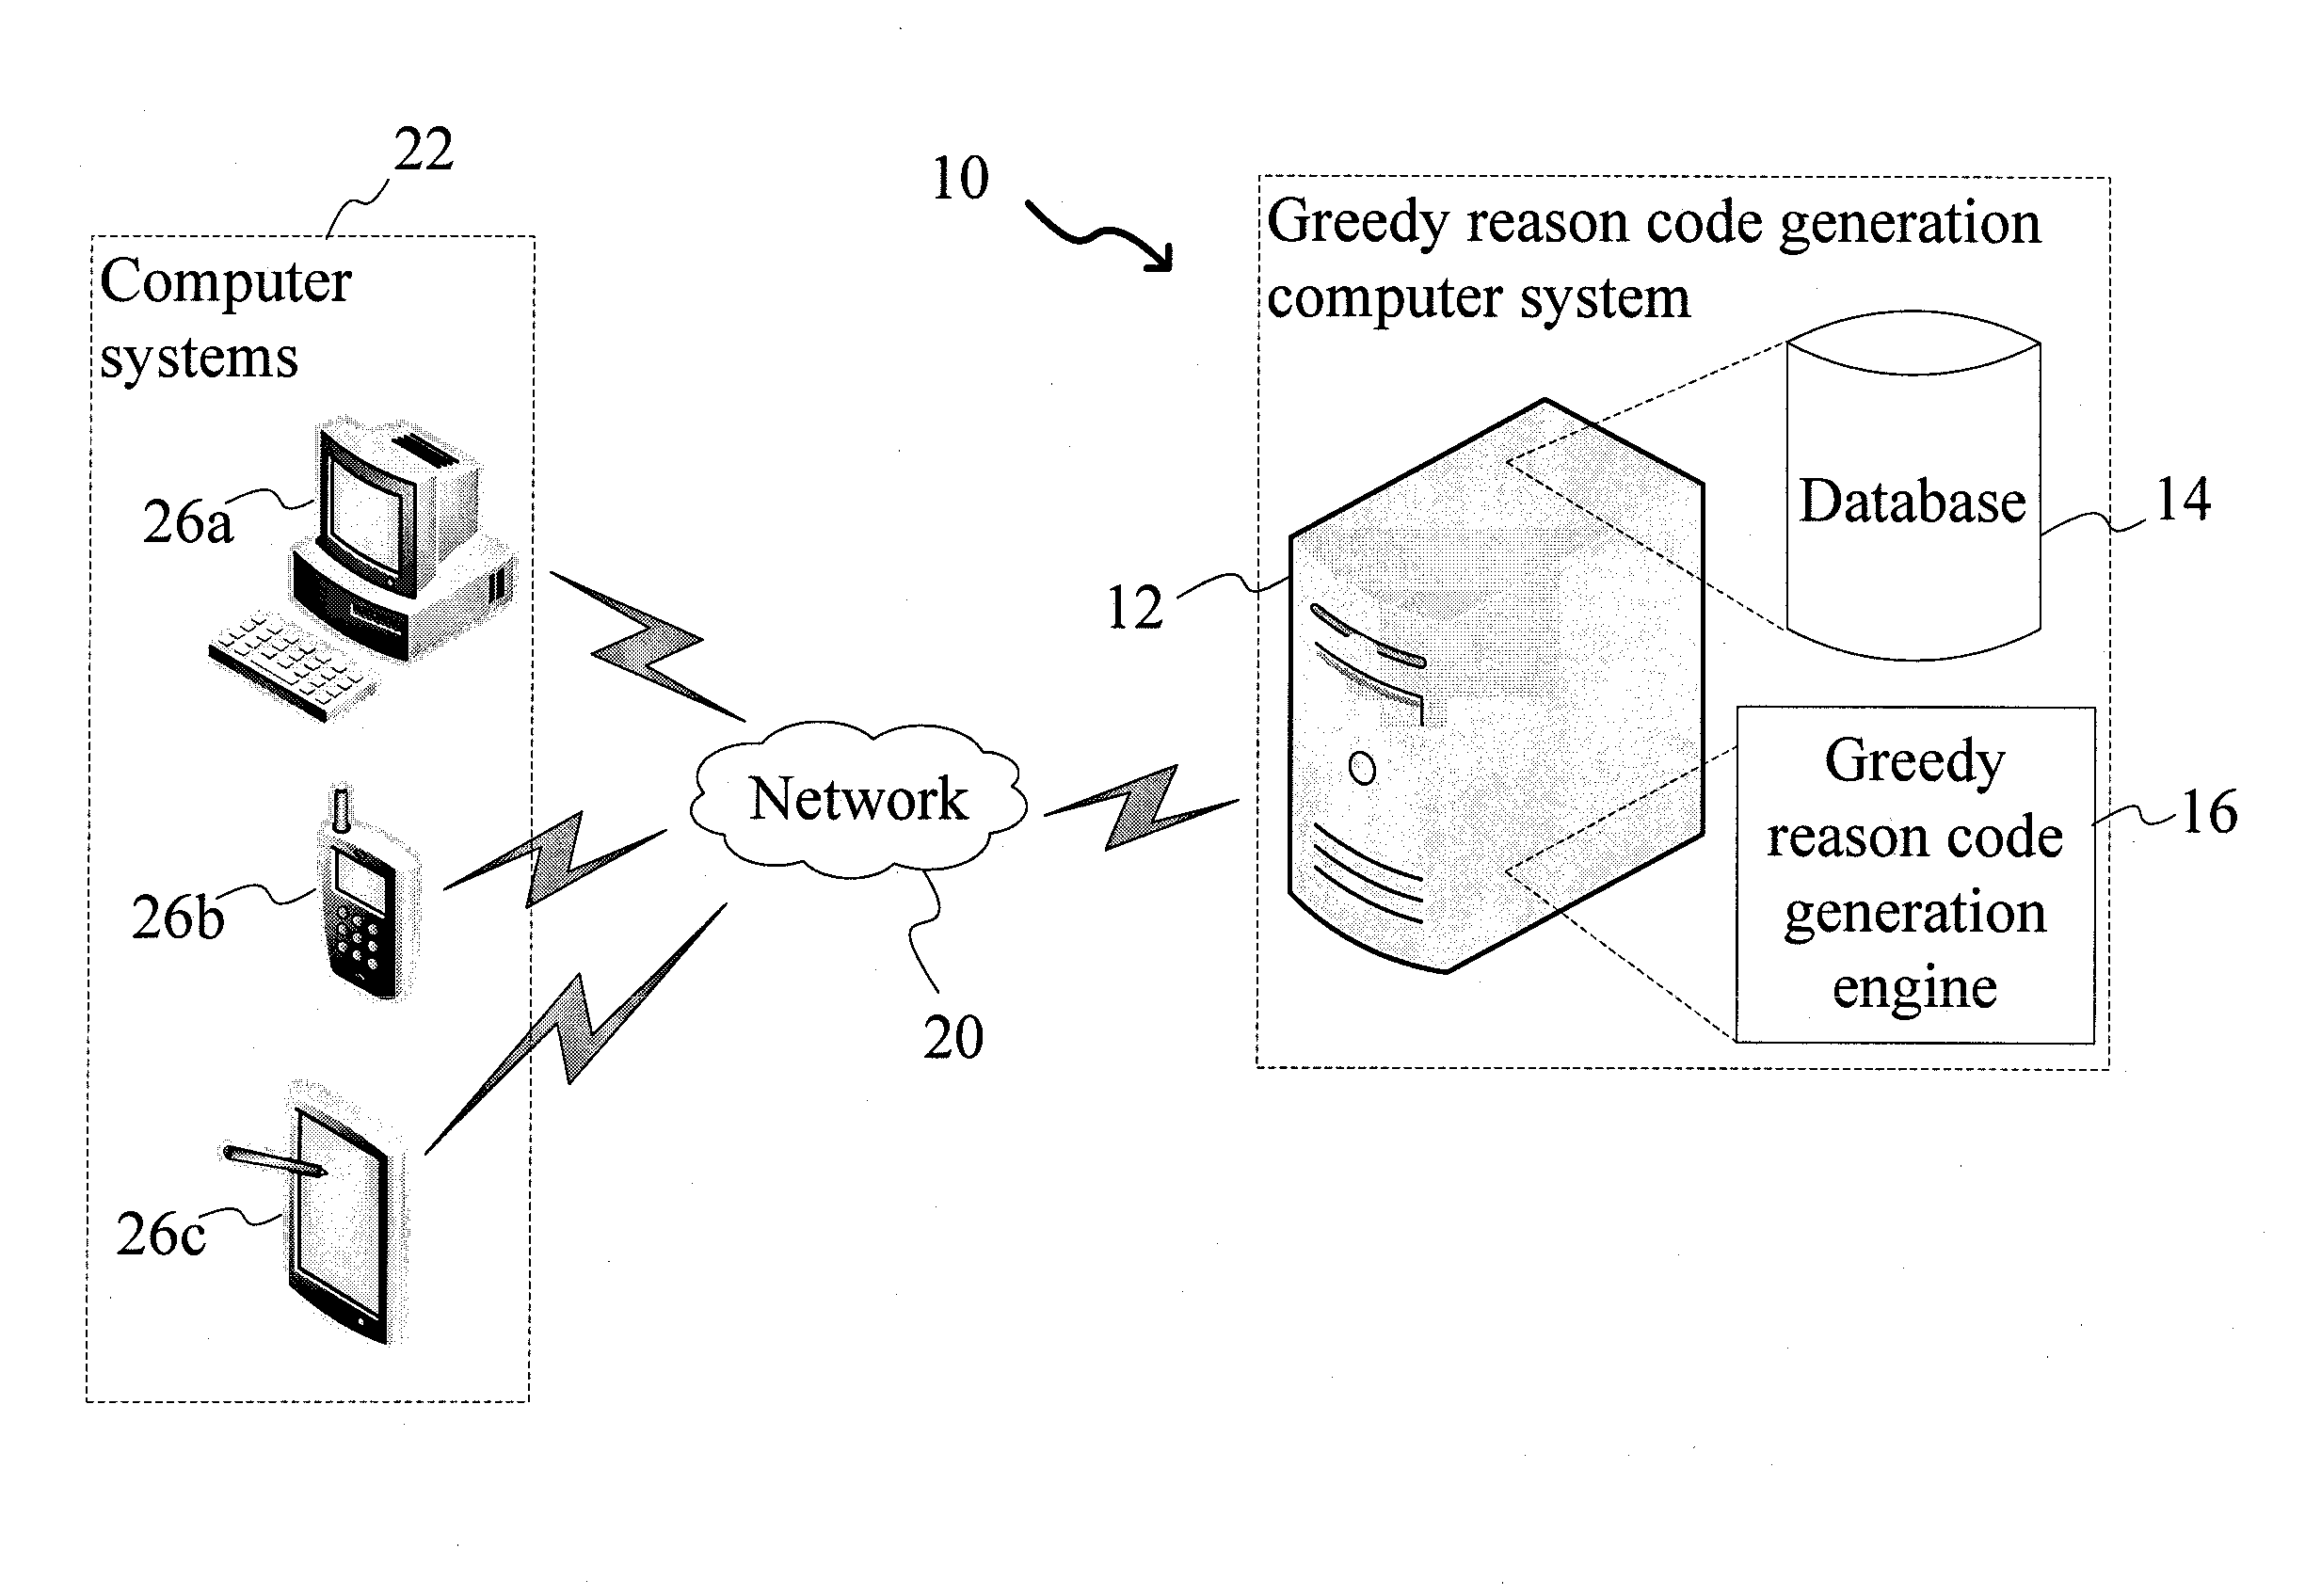 System and Method for Generating Greedy Reason Codes for Computer Models